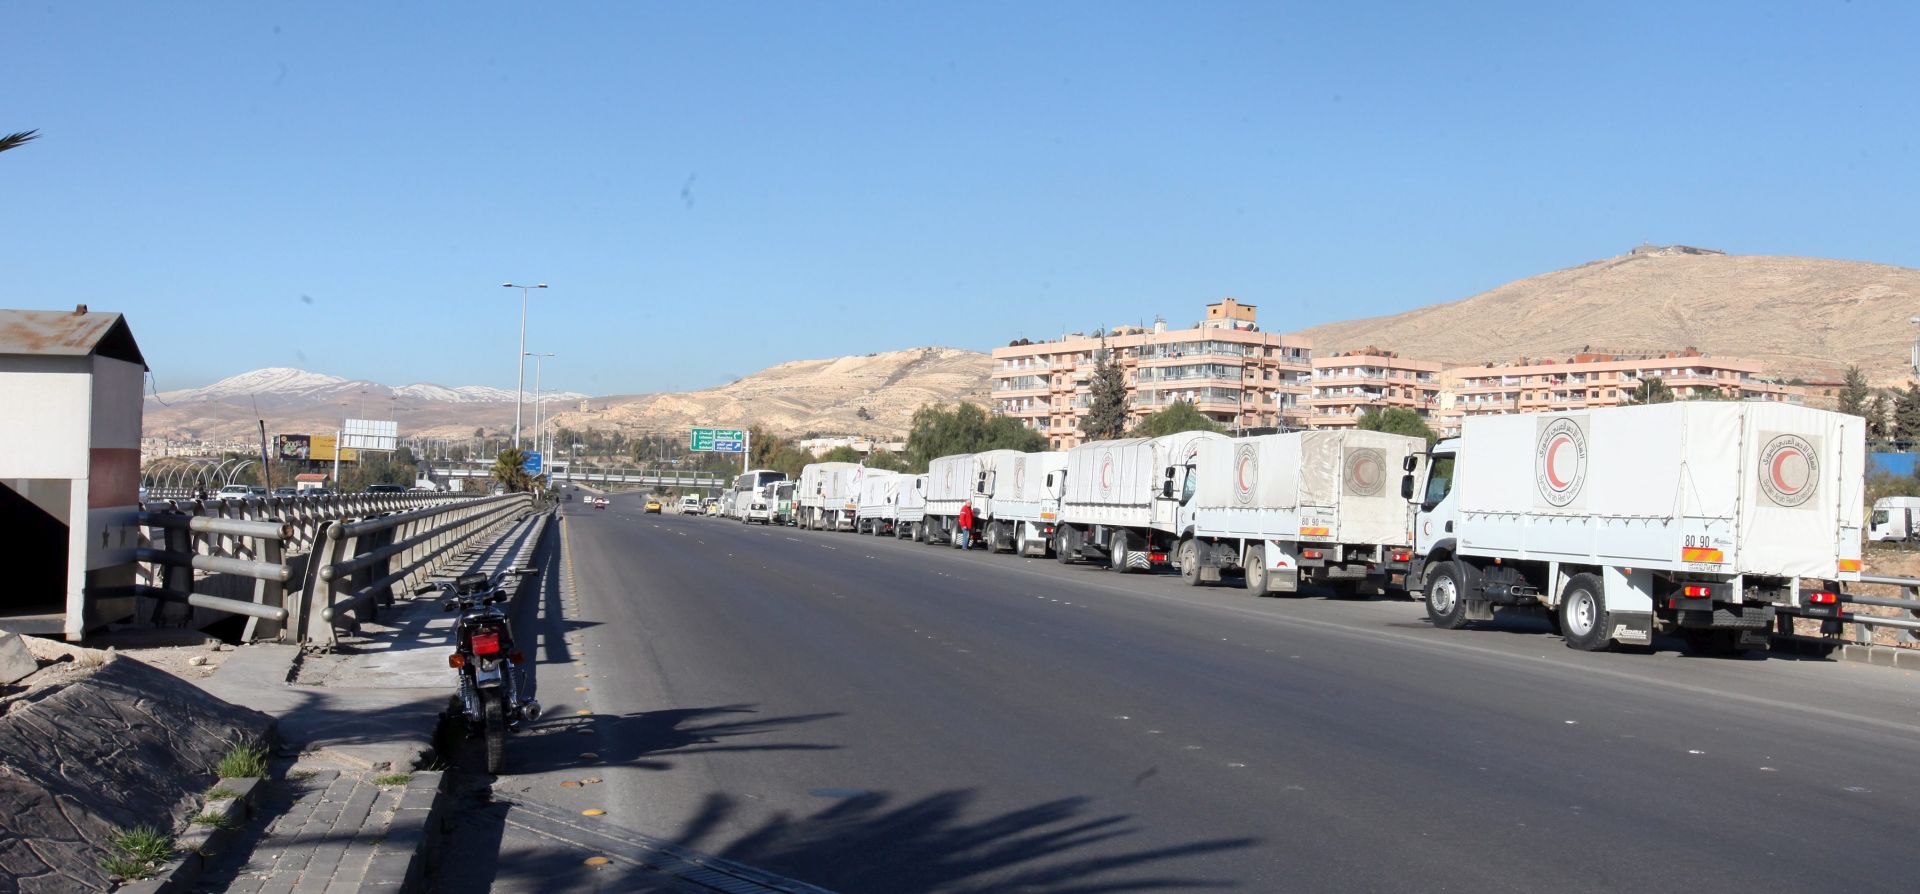 epa05165694 Trucks with relief goods stand in front of the United Nations Relief and Works Agency (UNRWA) offices in Damascus, Syria, 17 February 2016. Around 73 trucks loaded with food, infant formula and medicines, in addition to a mobile clinic and a medical team, will head to the besieged rebel-held towns of Madaya, al-Zabadani and al-Moadhamiya, as part of a UN sponsored aid operation in the war-torn country. A similar convoy of 25 trucks, a mobile clinic and a medical team, headed to the villages of Foua and Kfraya in the northern Idlib, which are besieged by rebels. The convoys are the third humanitarian aid delivery to the besieged areas after two similar efforts last month.  EPA/YOUSSEF BADAWI